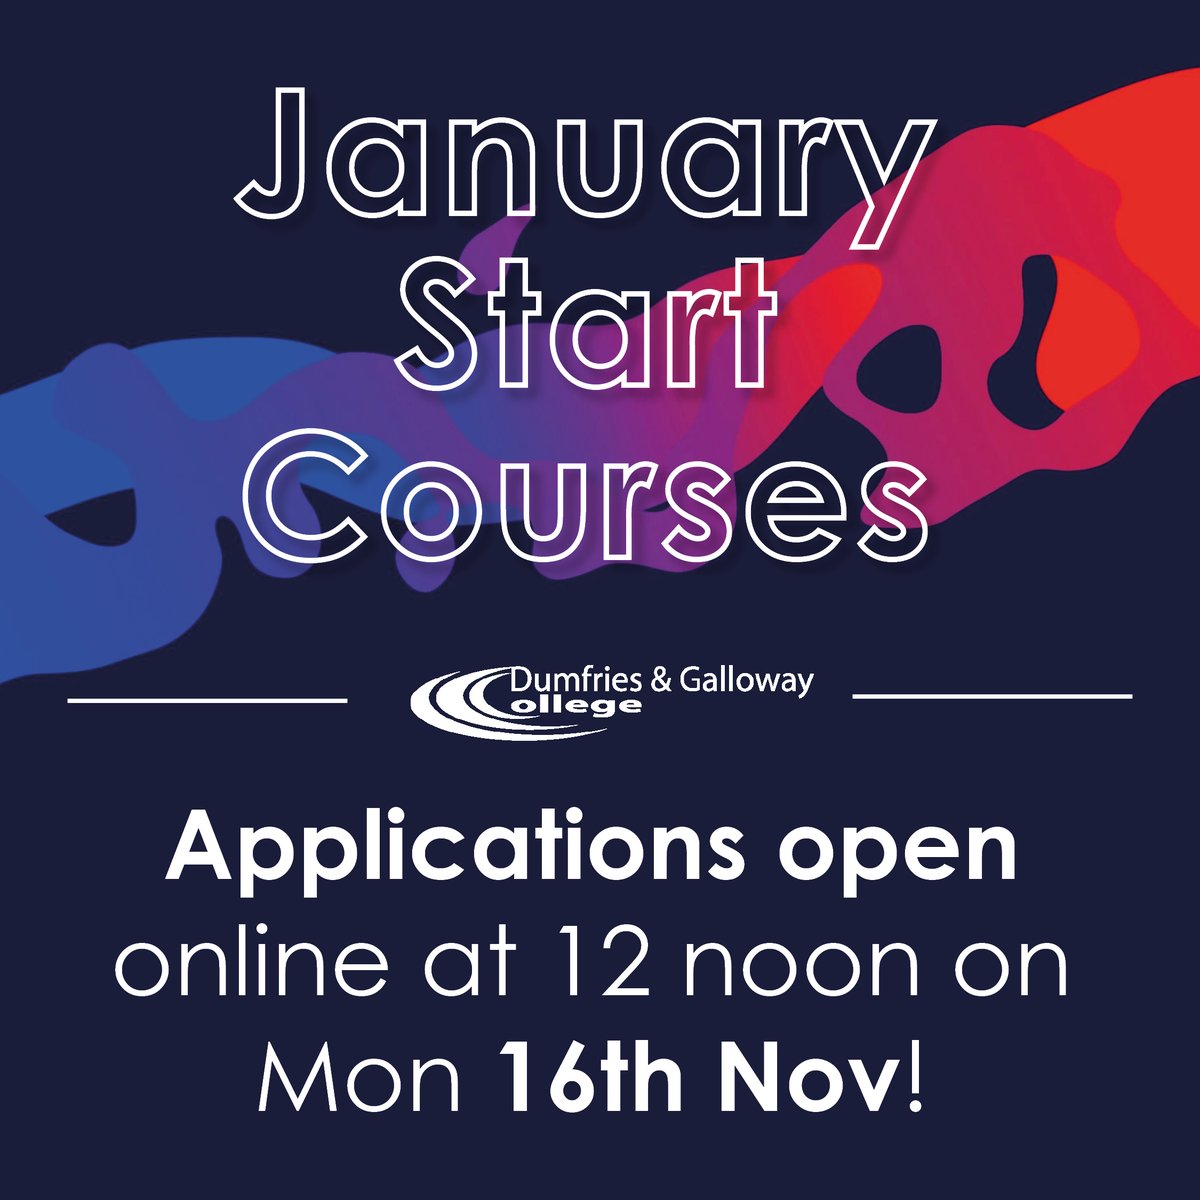 Check back here or our website on Monday at 12pm to see the exciting courses we will be running this January 😁 #Januarycourses #education #applications